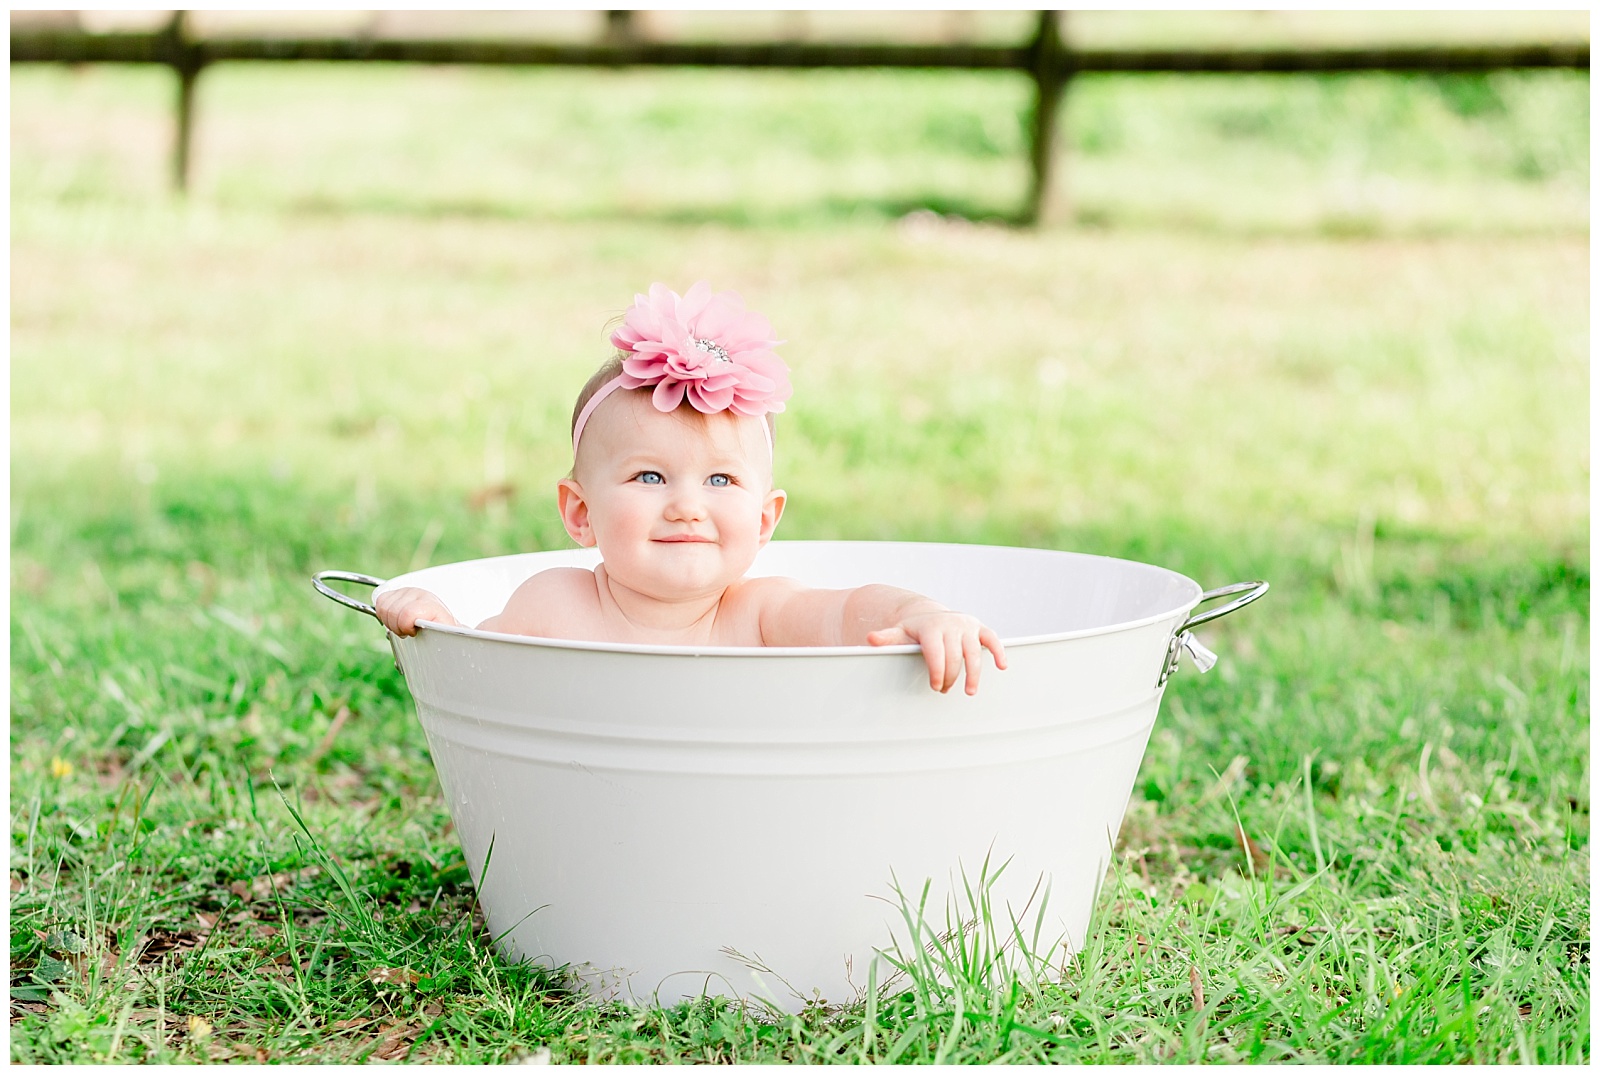 Spring One Year Old Birthday Session for Baby Girl with Different Shades of Pink